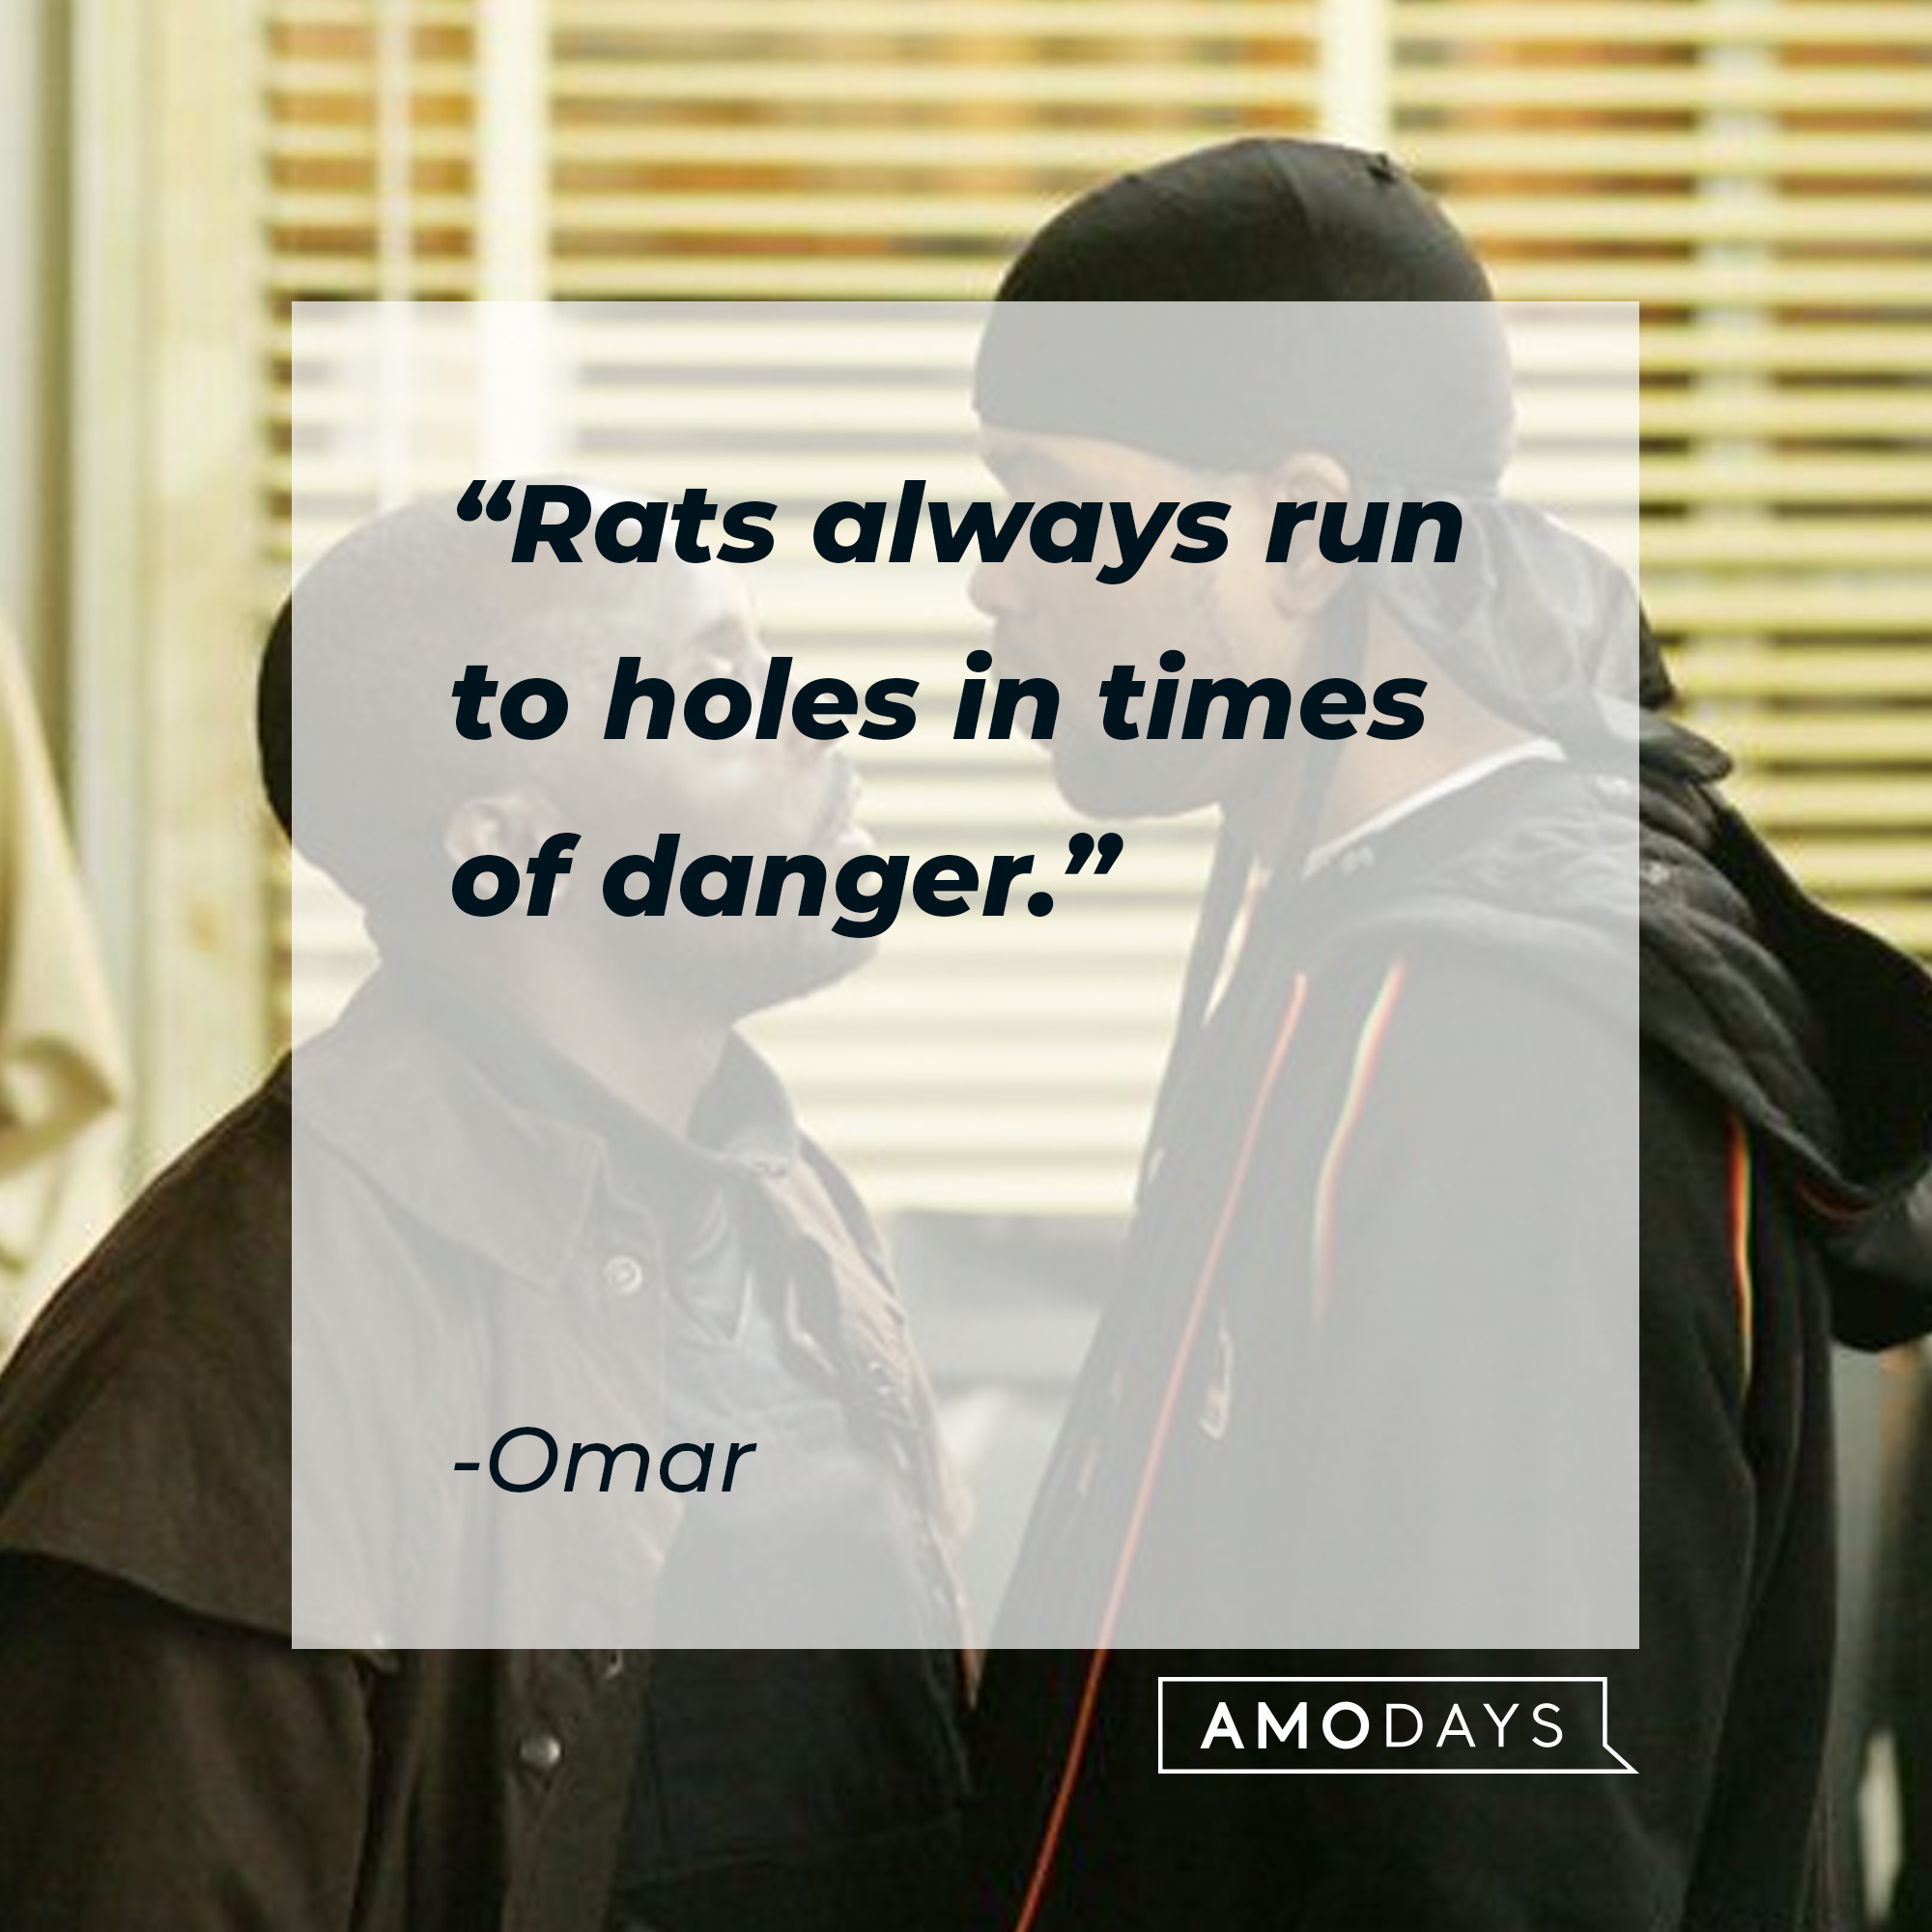 Omar's quote: "Rats always run to holes in times of danger." | Source: facebook.com/TheWire